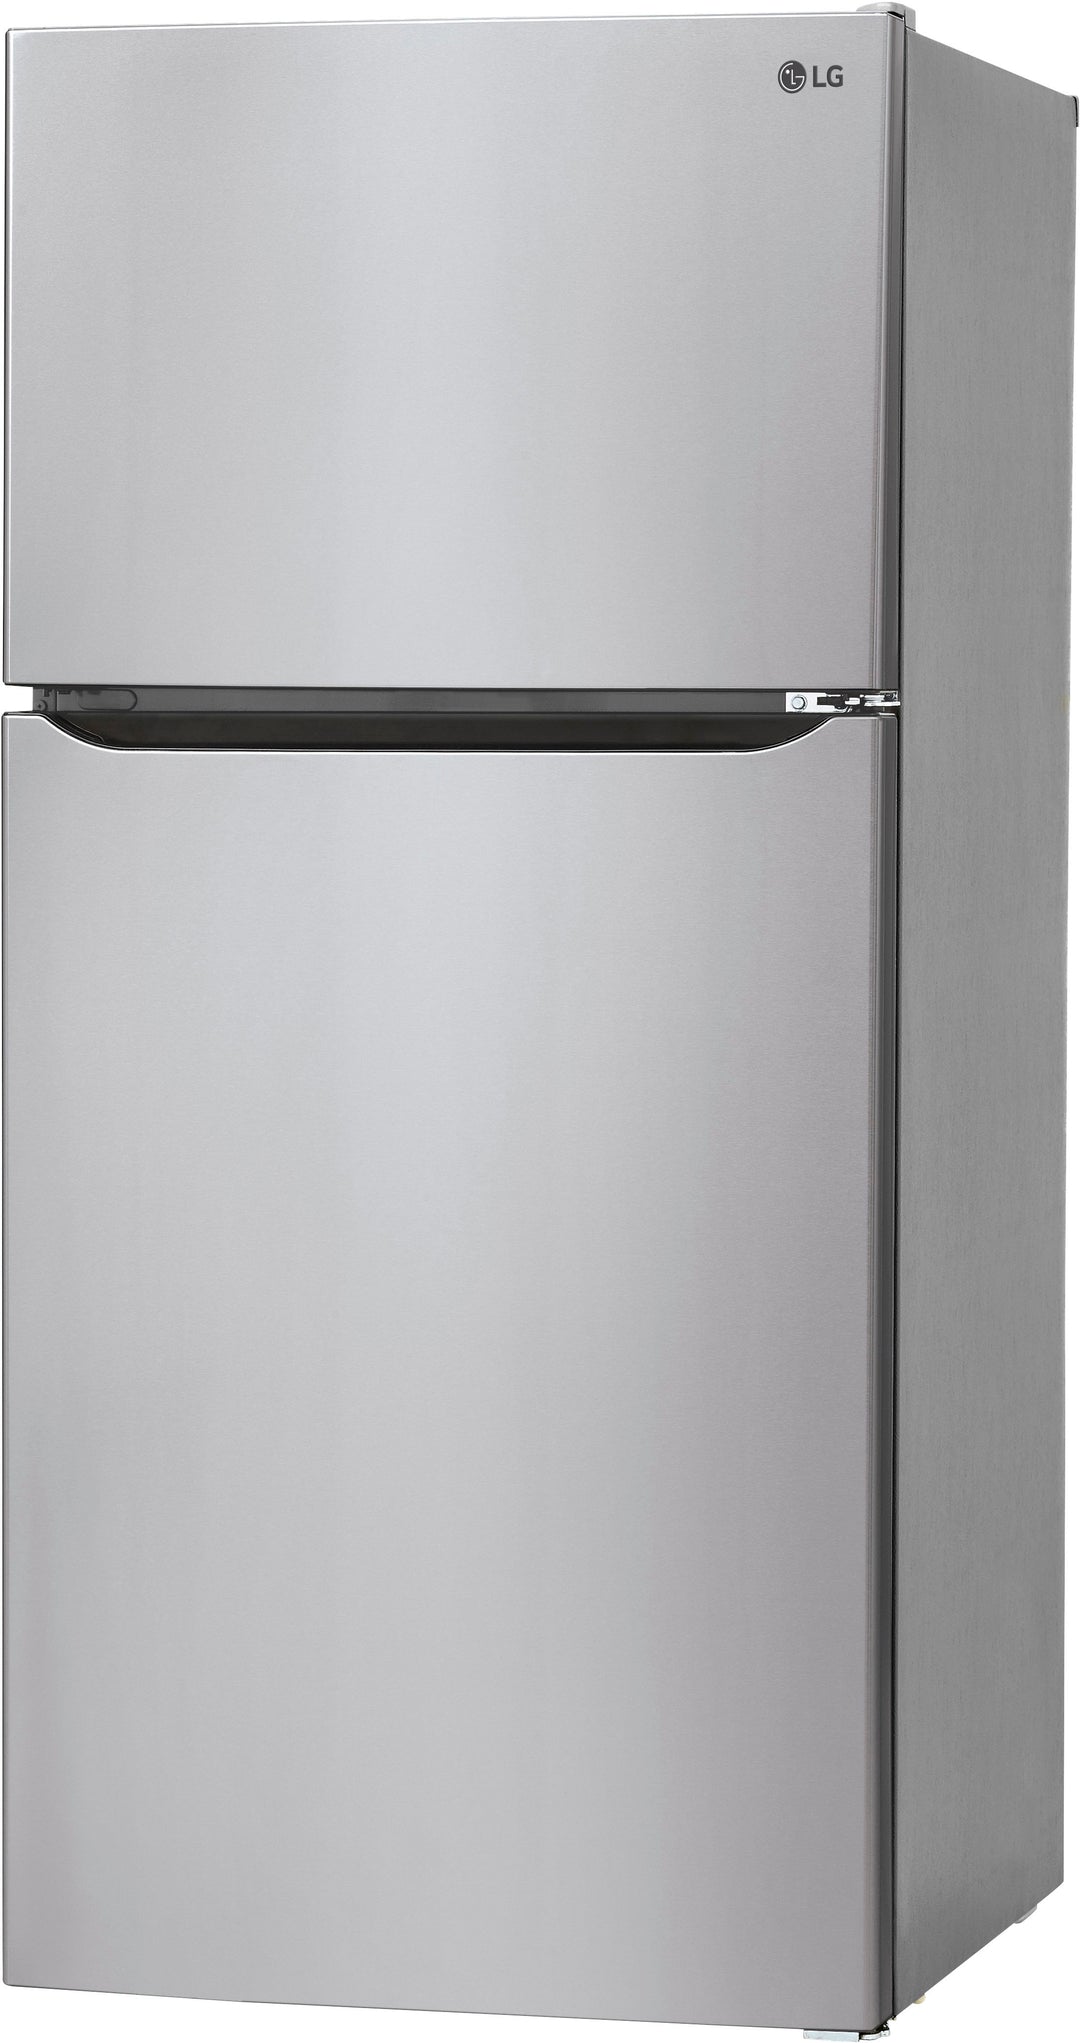 LG - 23.8 Cu Ft Top Mount Refrigerator with Internal Water Dispenser - Stainless steel_1